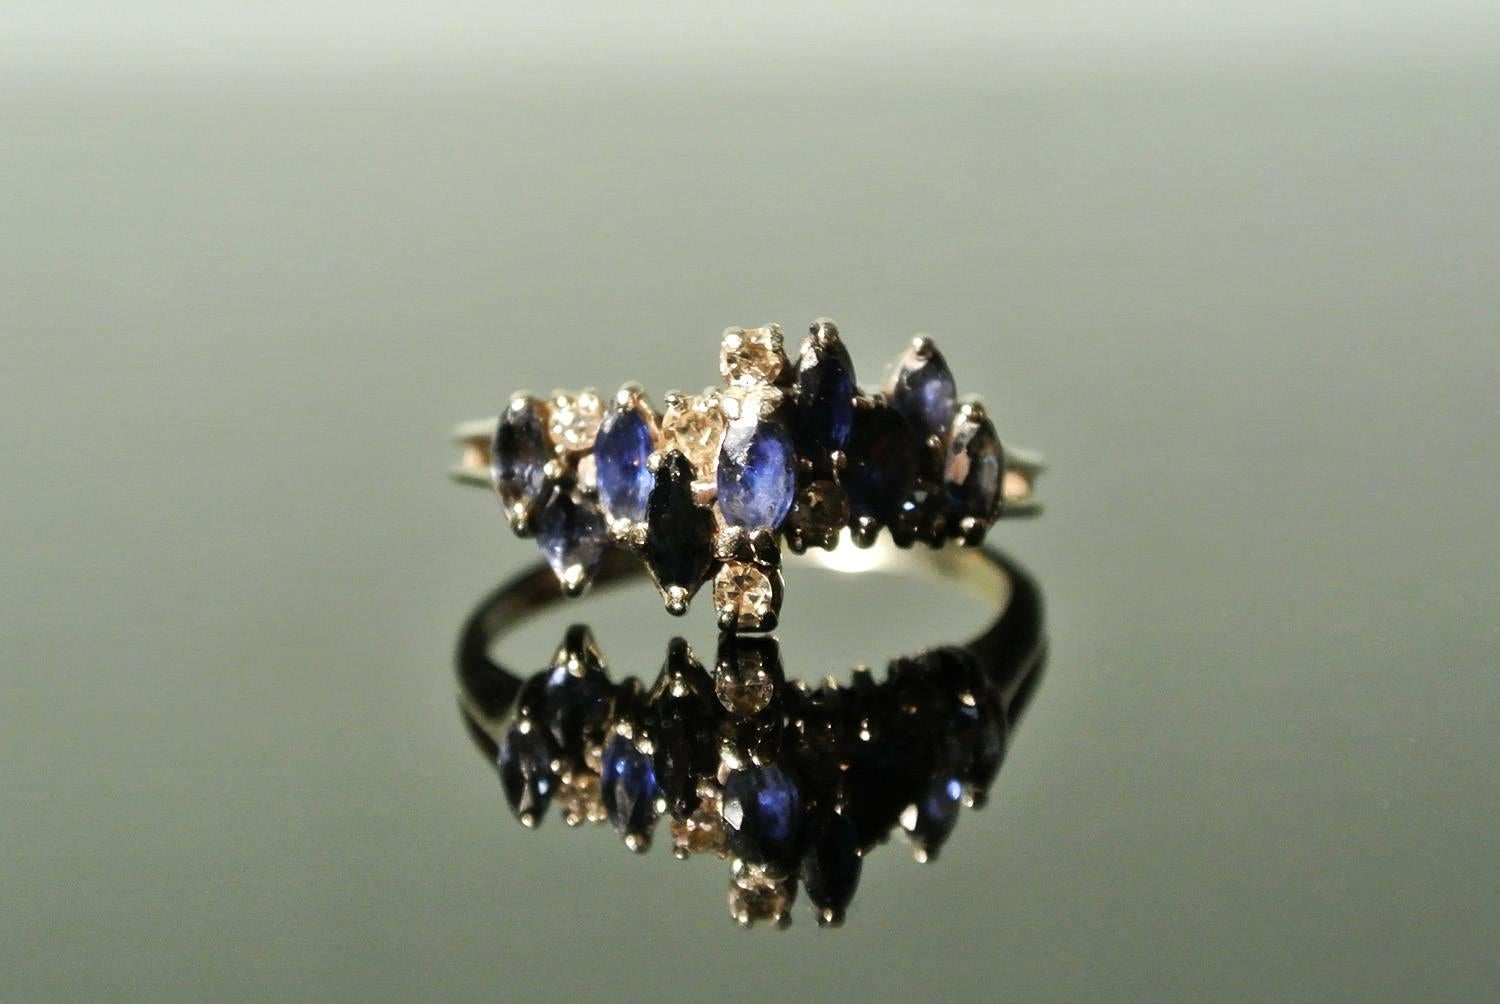 A lovely sapphire and diamond Art Deco ring with all original gemstones.

Set with nine marquise cut sapphires ranging from rich royal blue to a clear delicate cornflower color and six crystal clear round brilliant cut claw set diamonds. The white